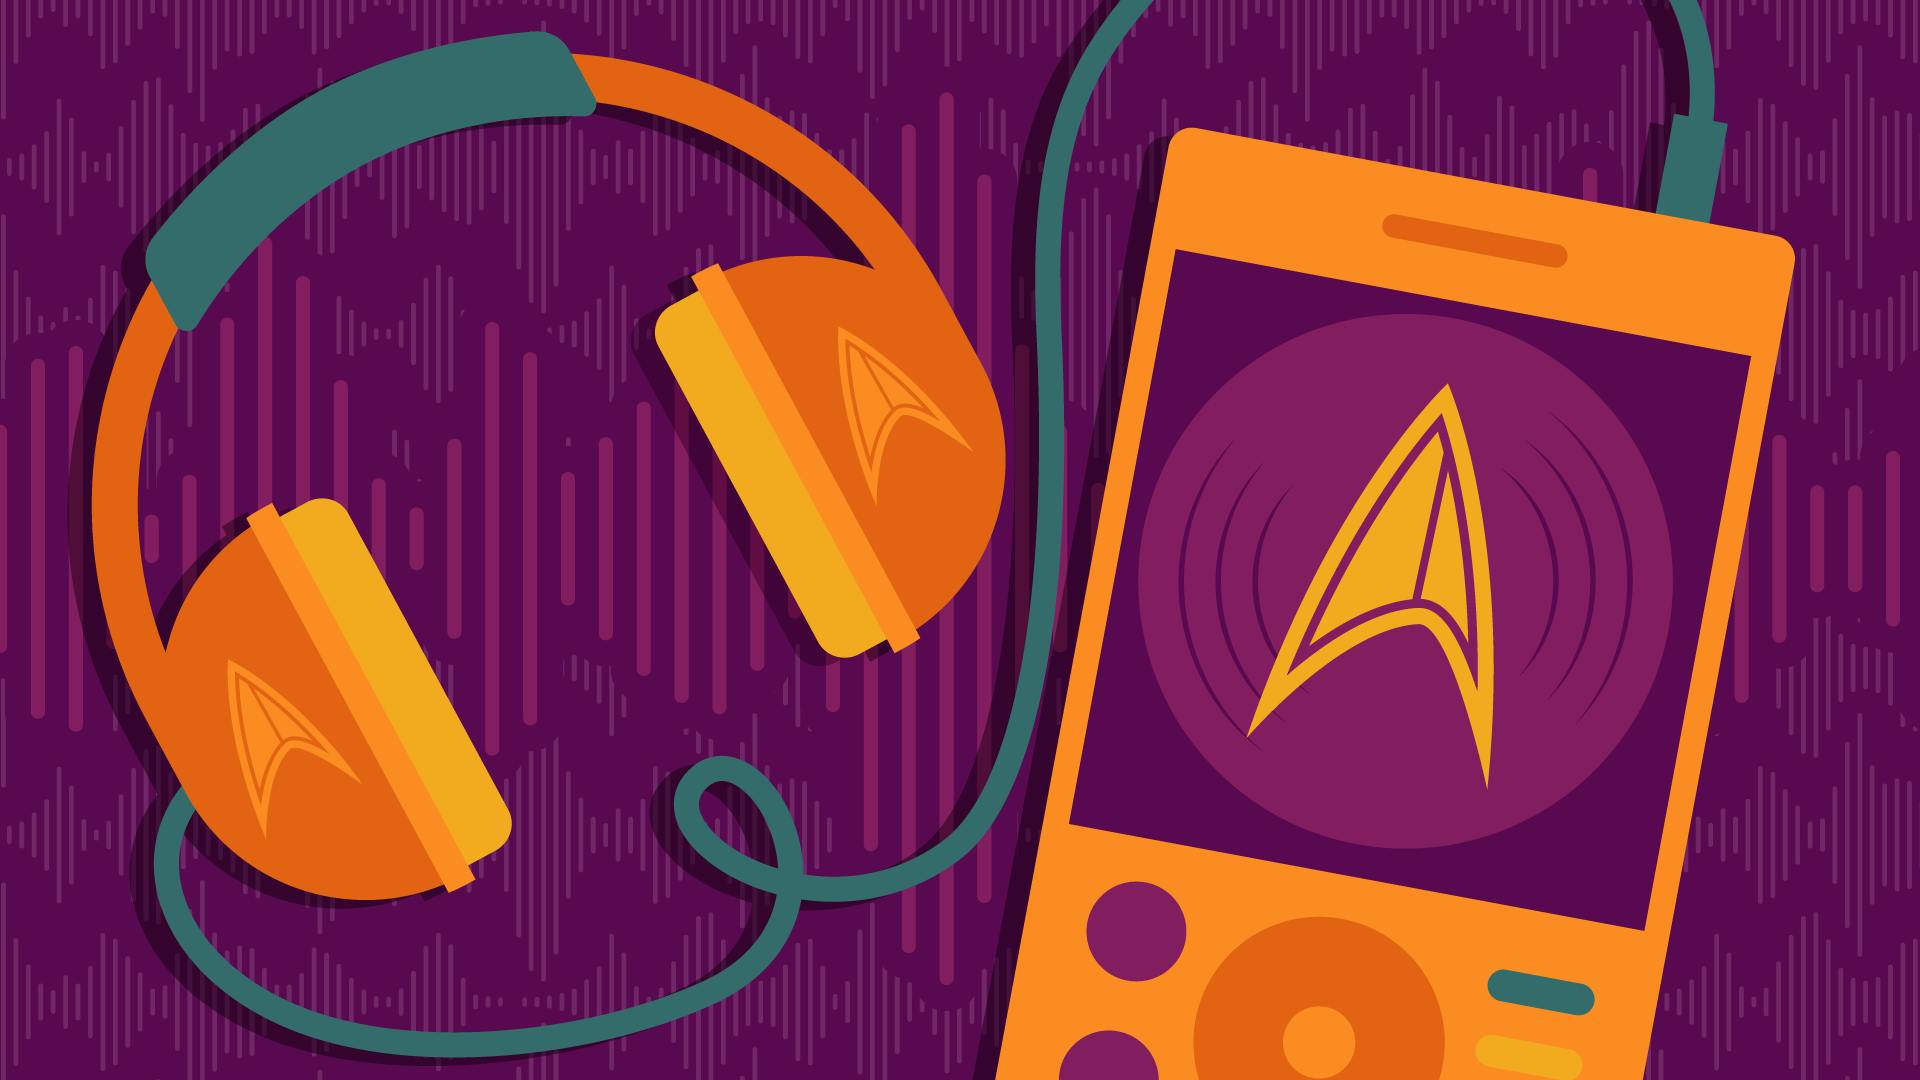 Illustration of headphones attached to a music player, both adorned with Star Trek deltas